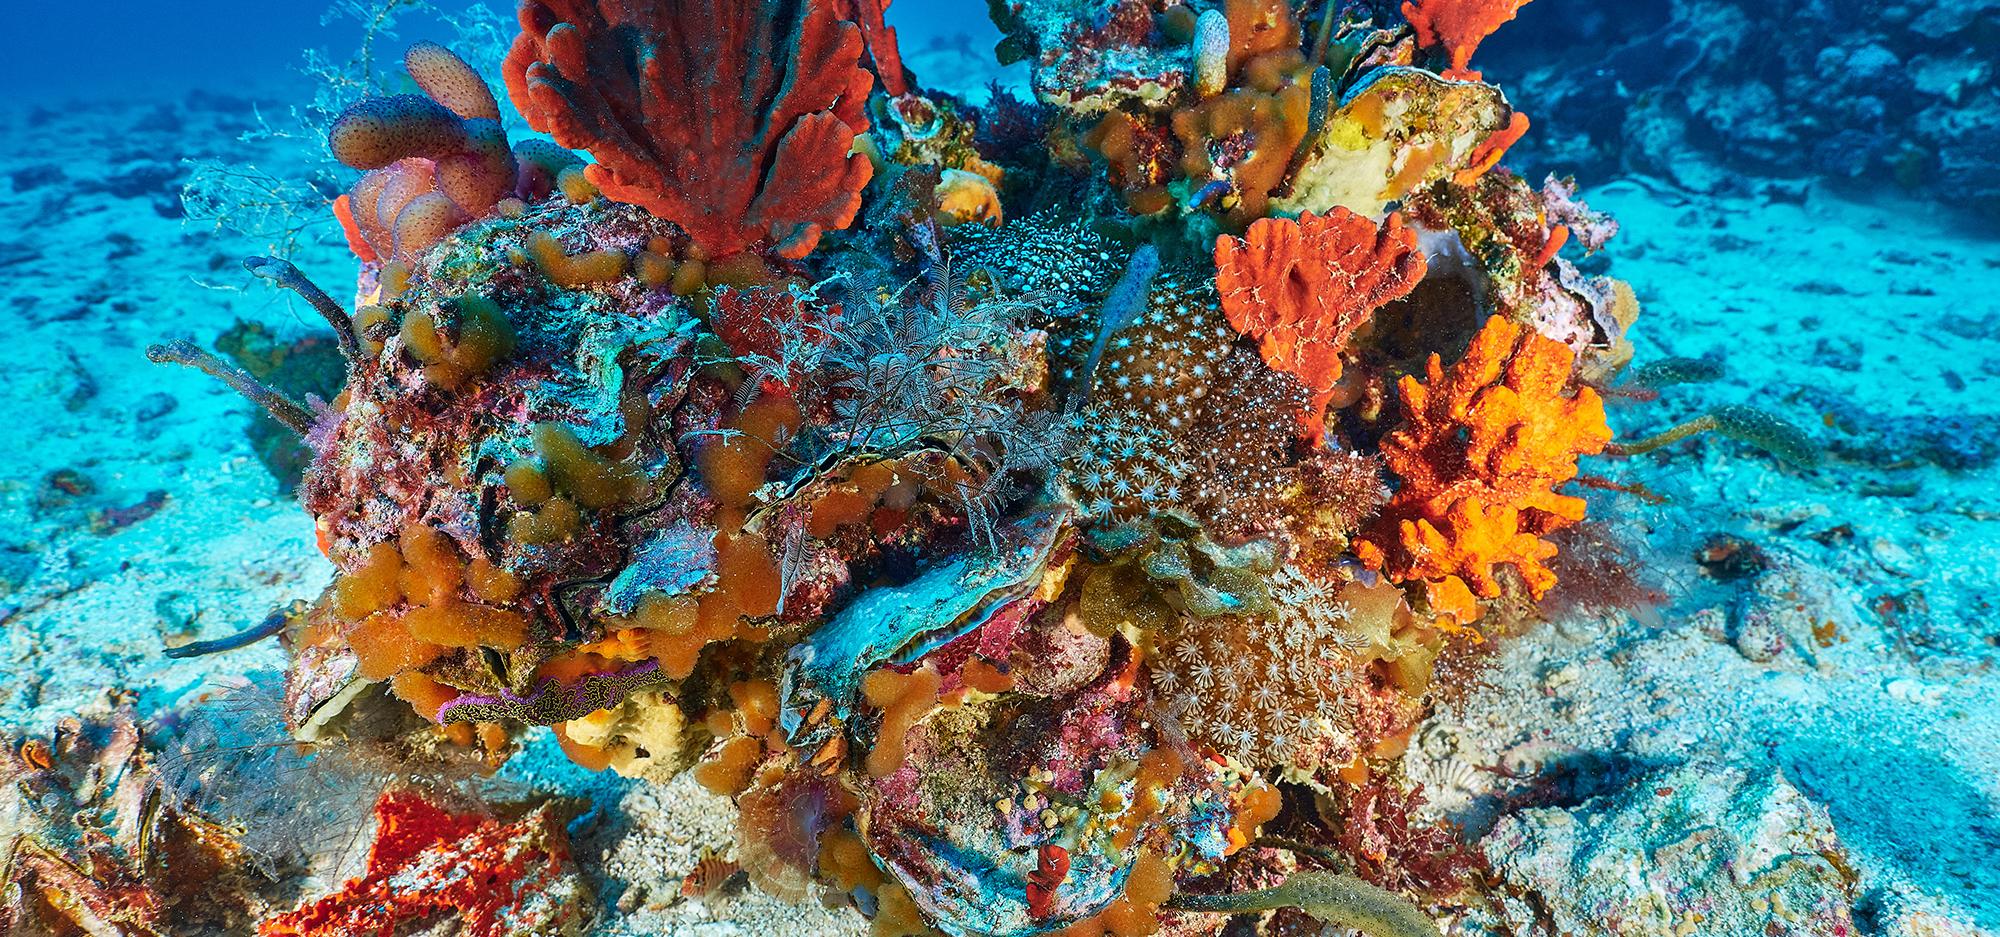 Brightly coloured corals and other sea life in deep blue water